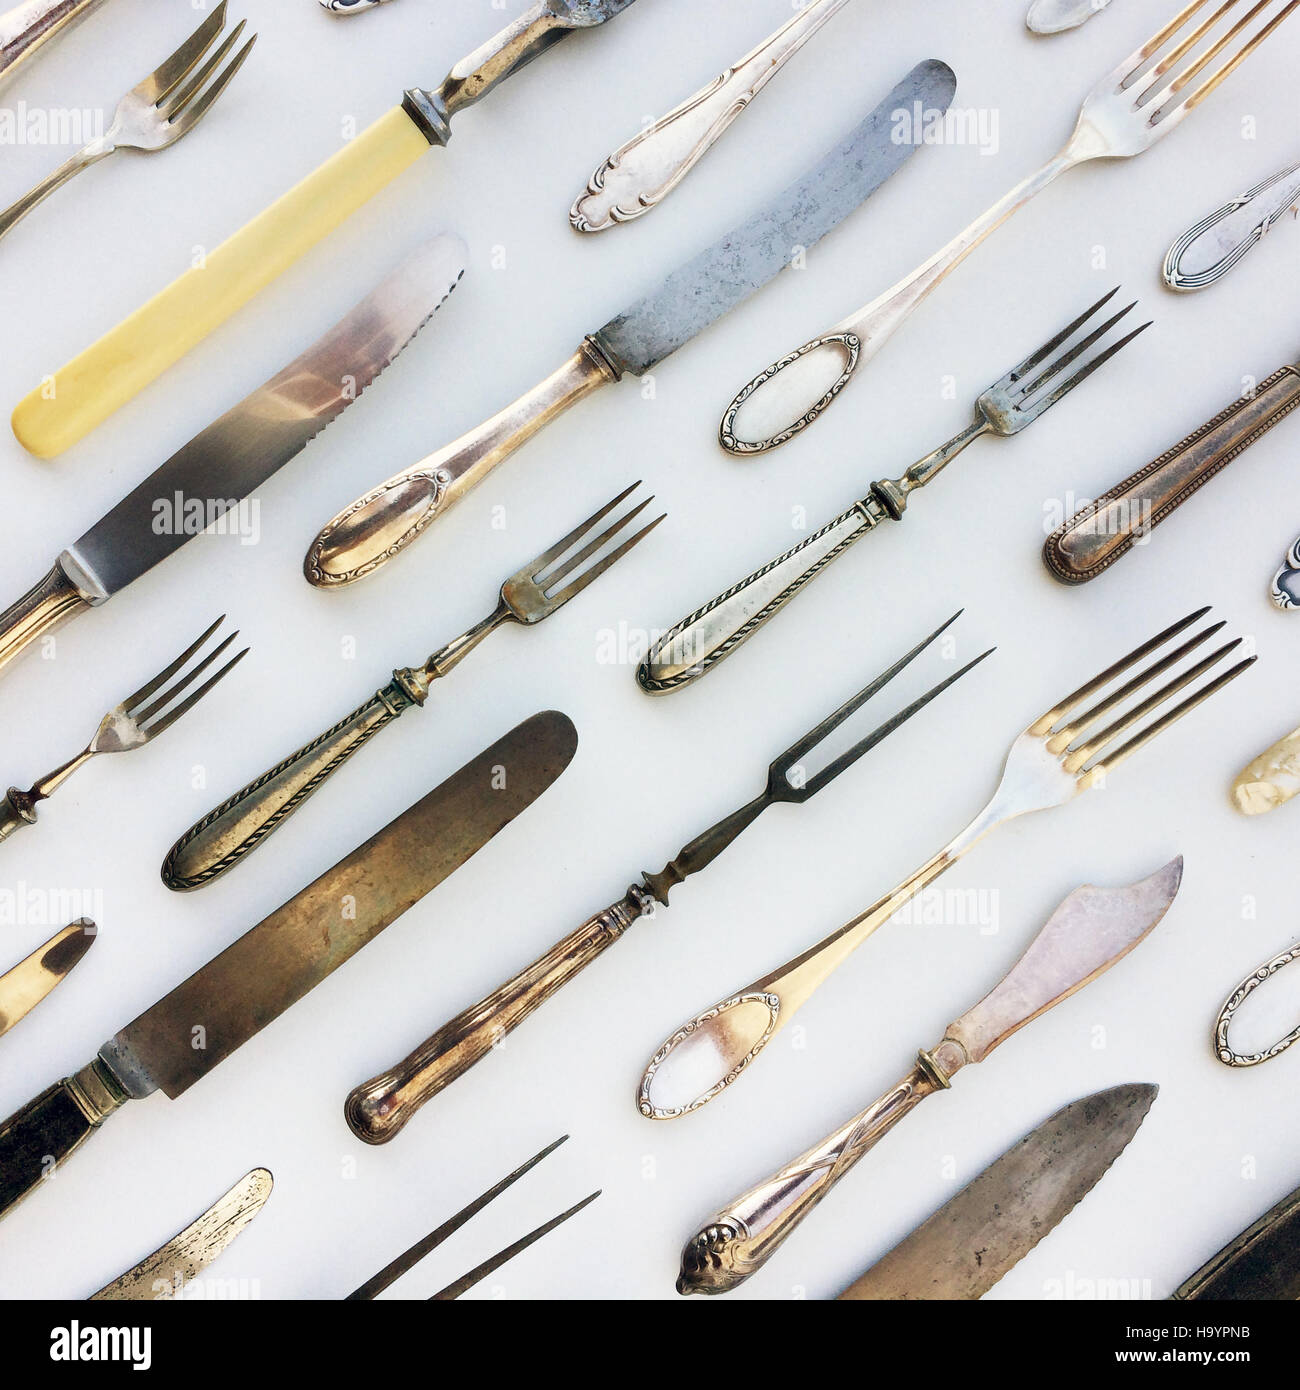 beautiful cutlery collection - old flatware set Stock Photo